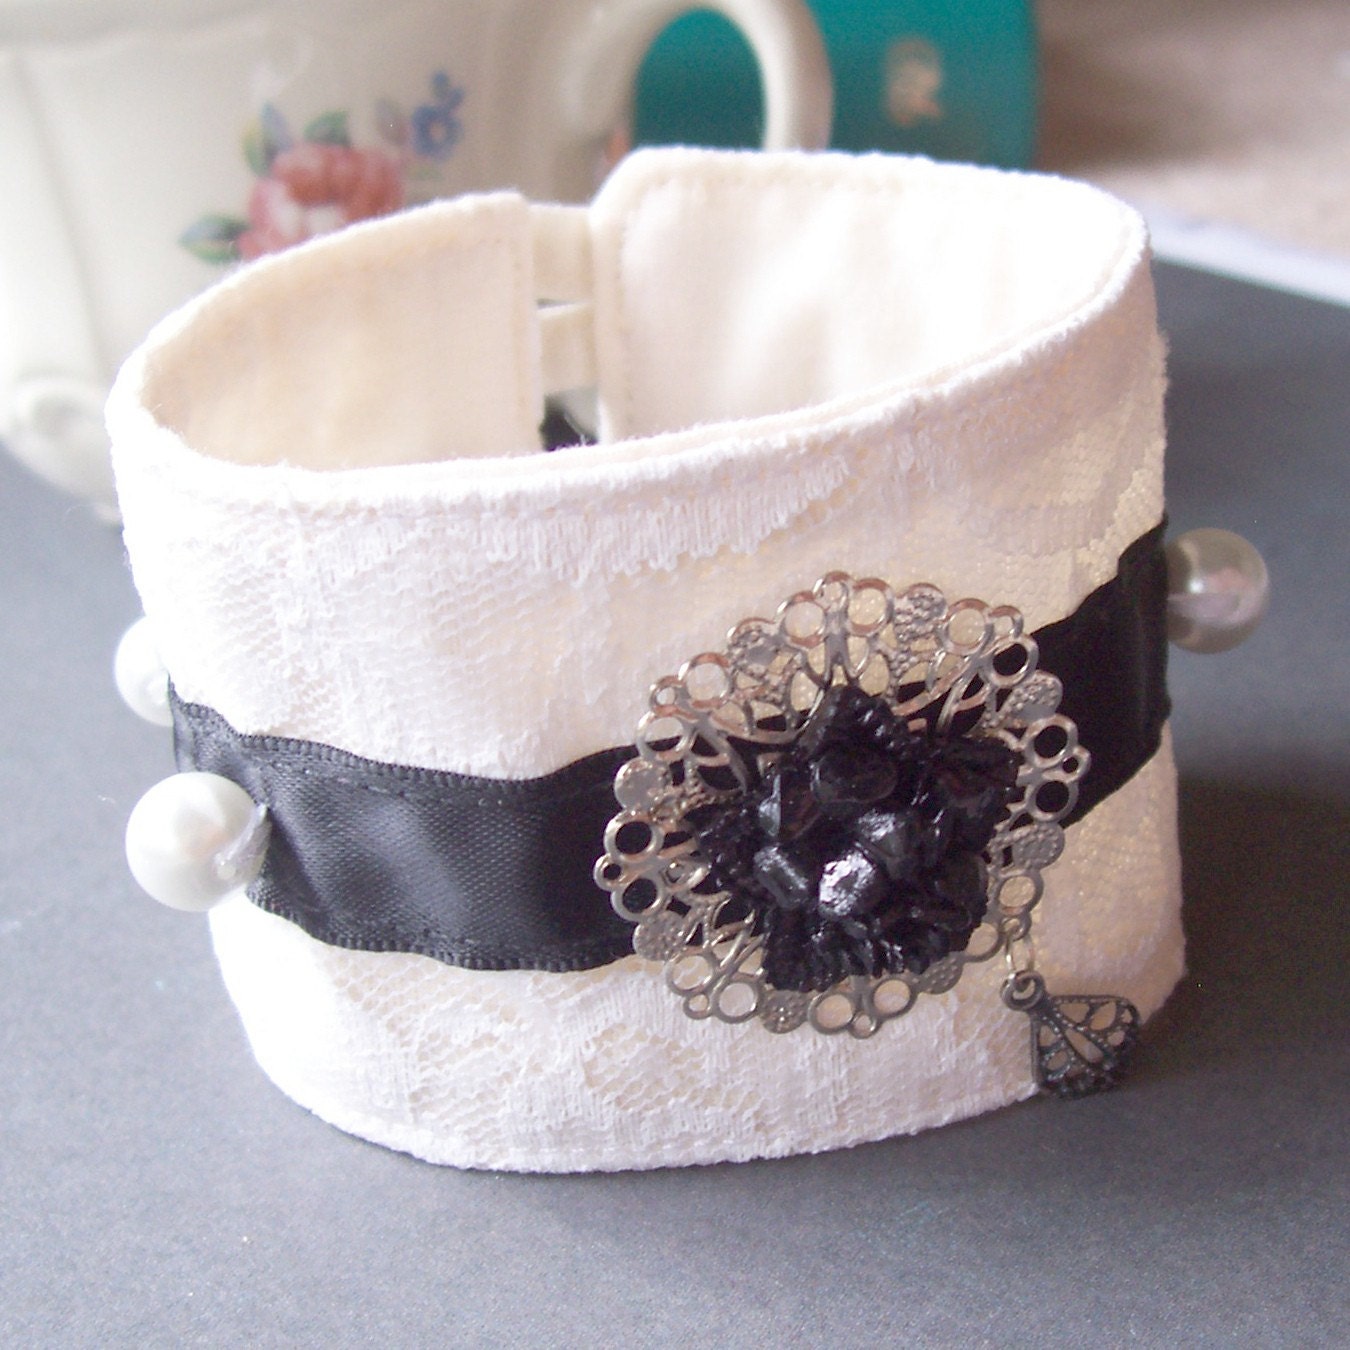 Fabric Cuff. Black Tie. Bracelet. Vintage Flower Cabochon. Lace. Ribbon. Black and White  by dspdavey on Etsy